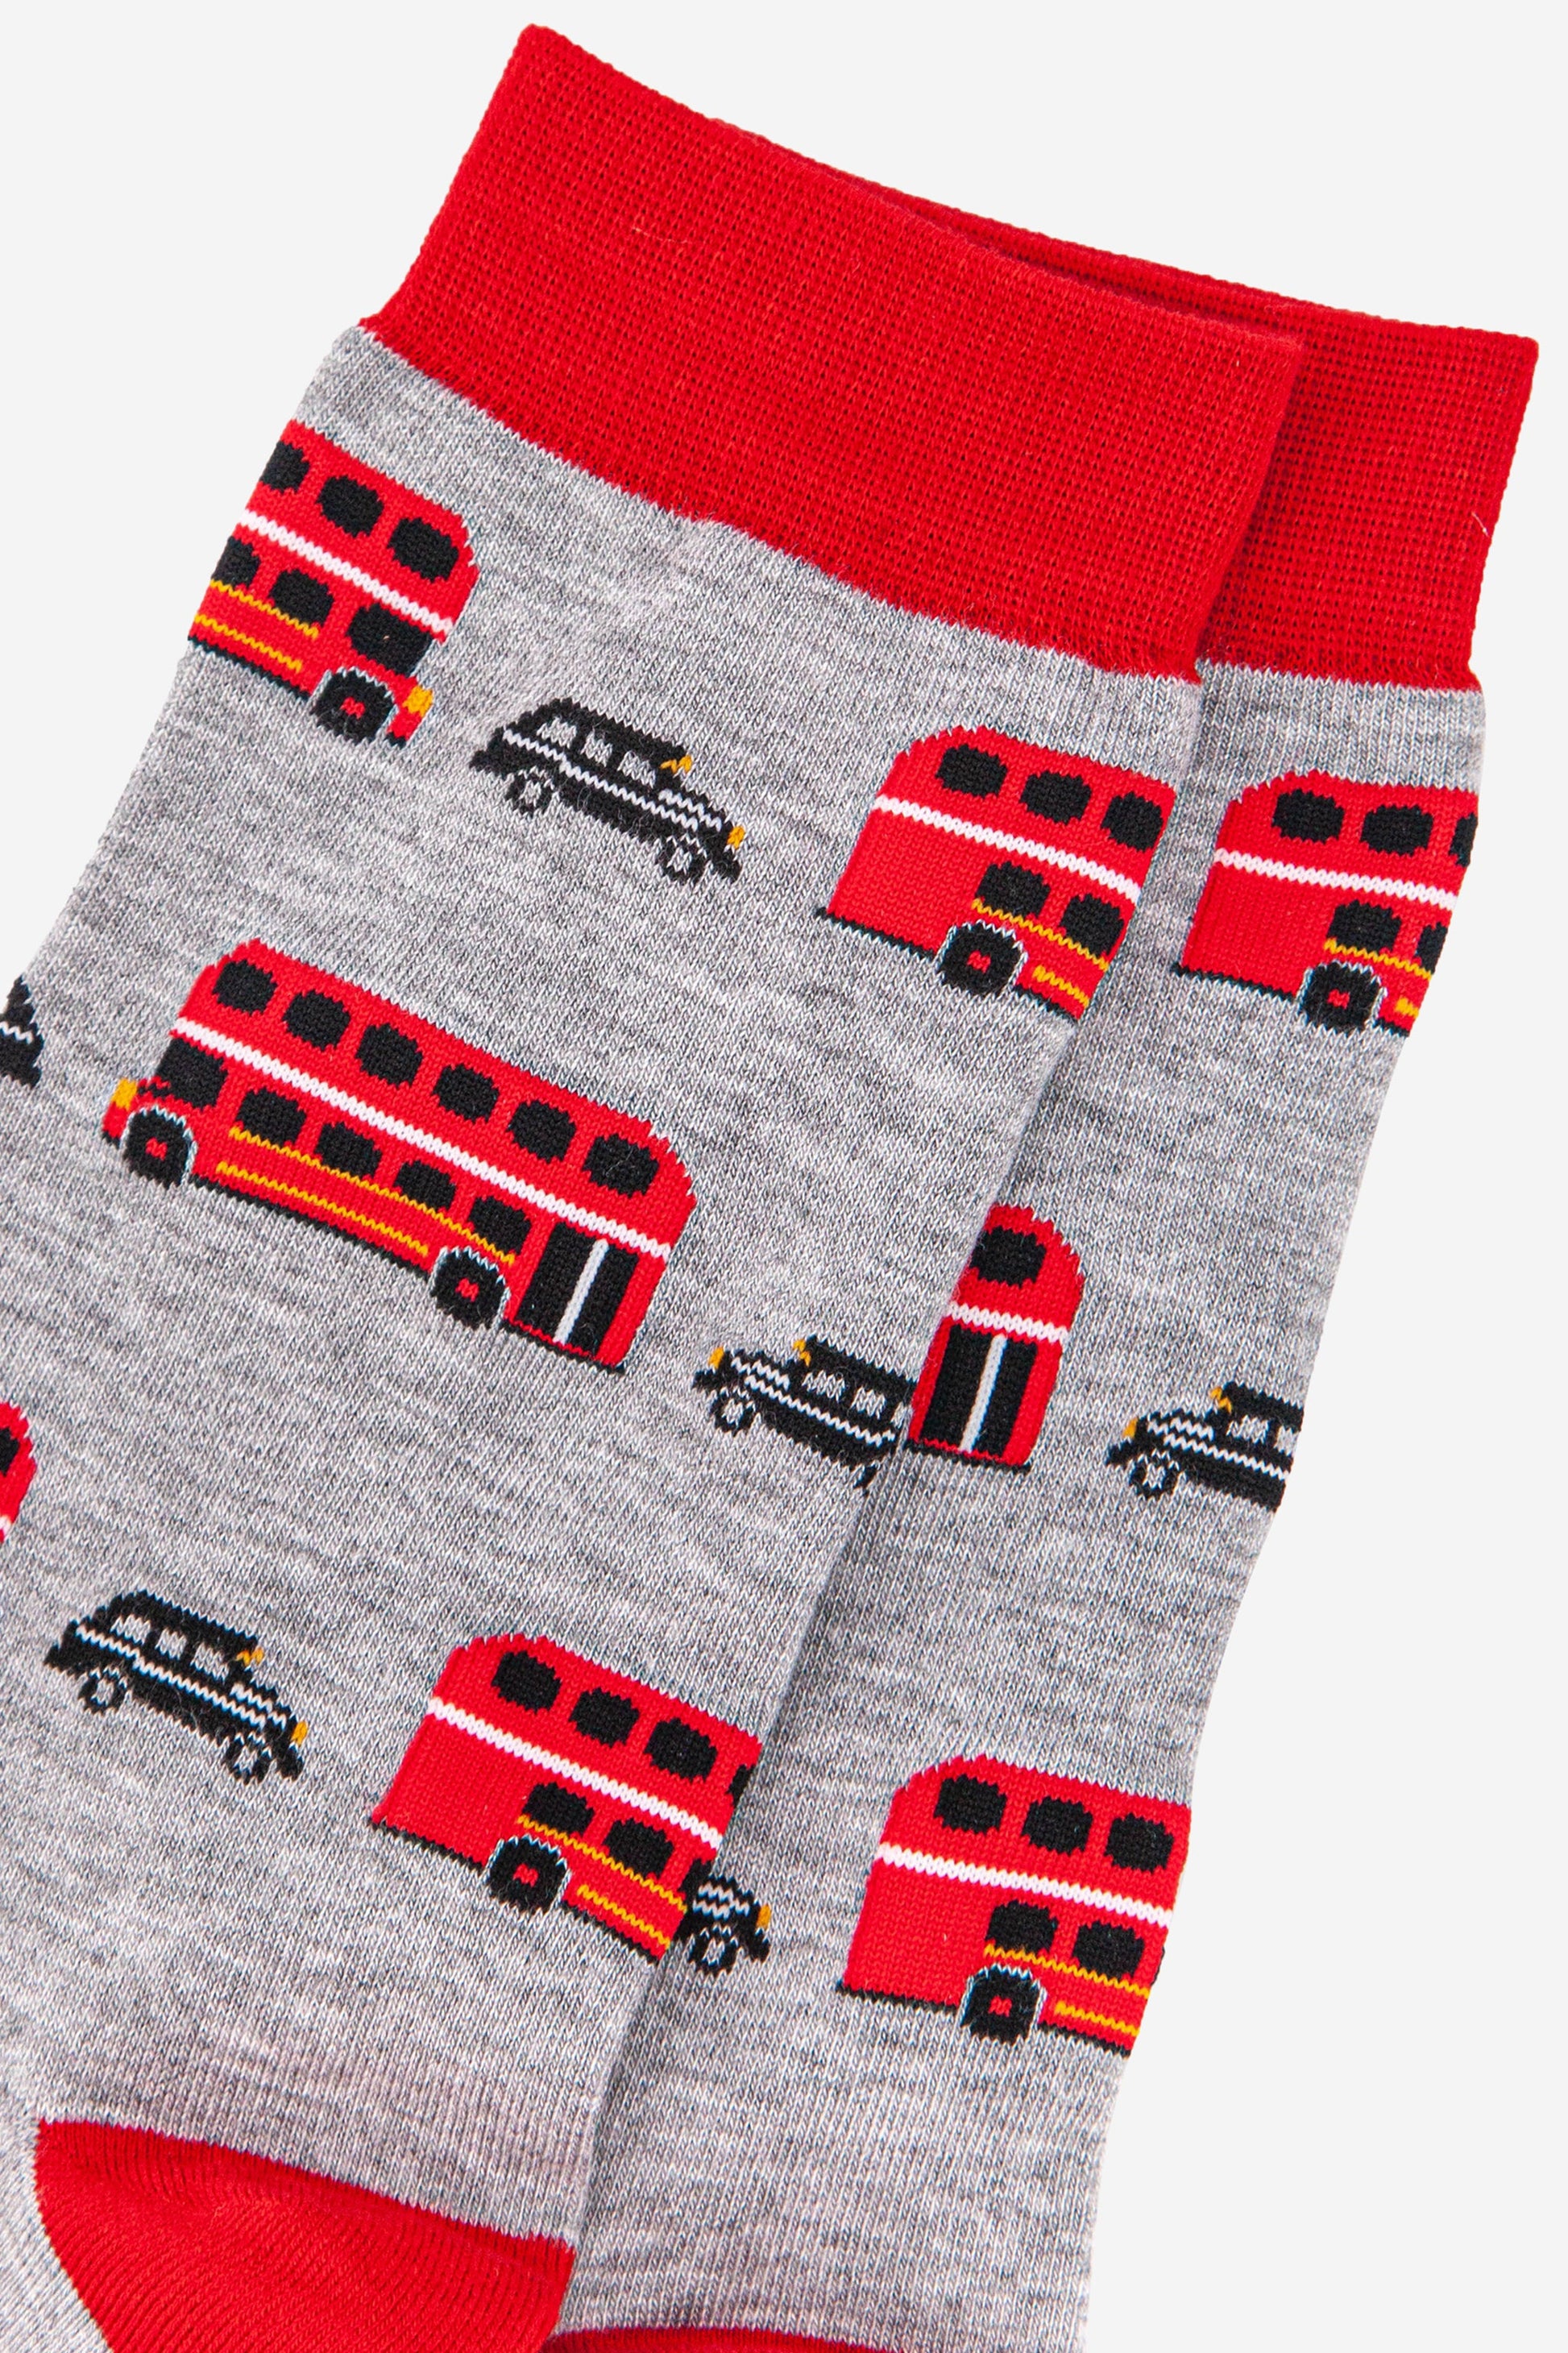 close up of the red bus and black taxi design